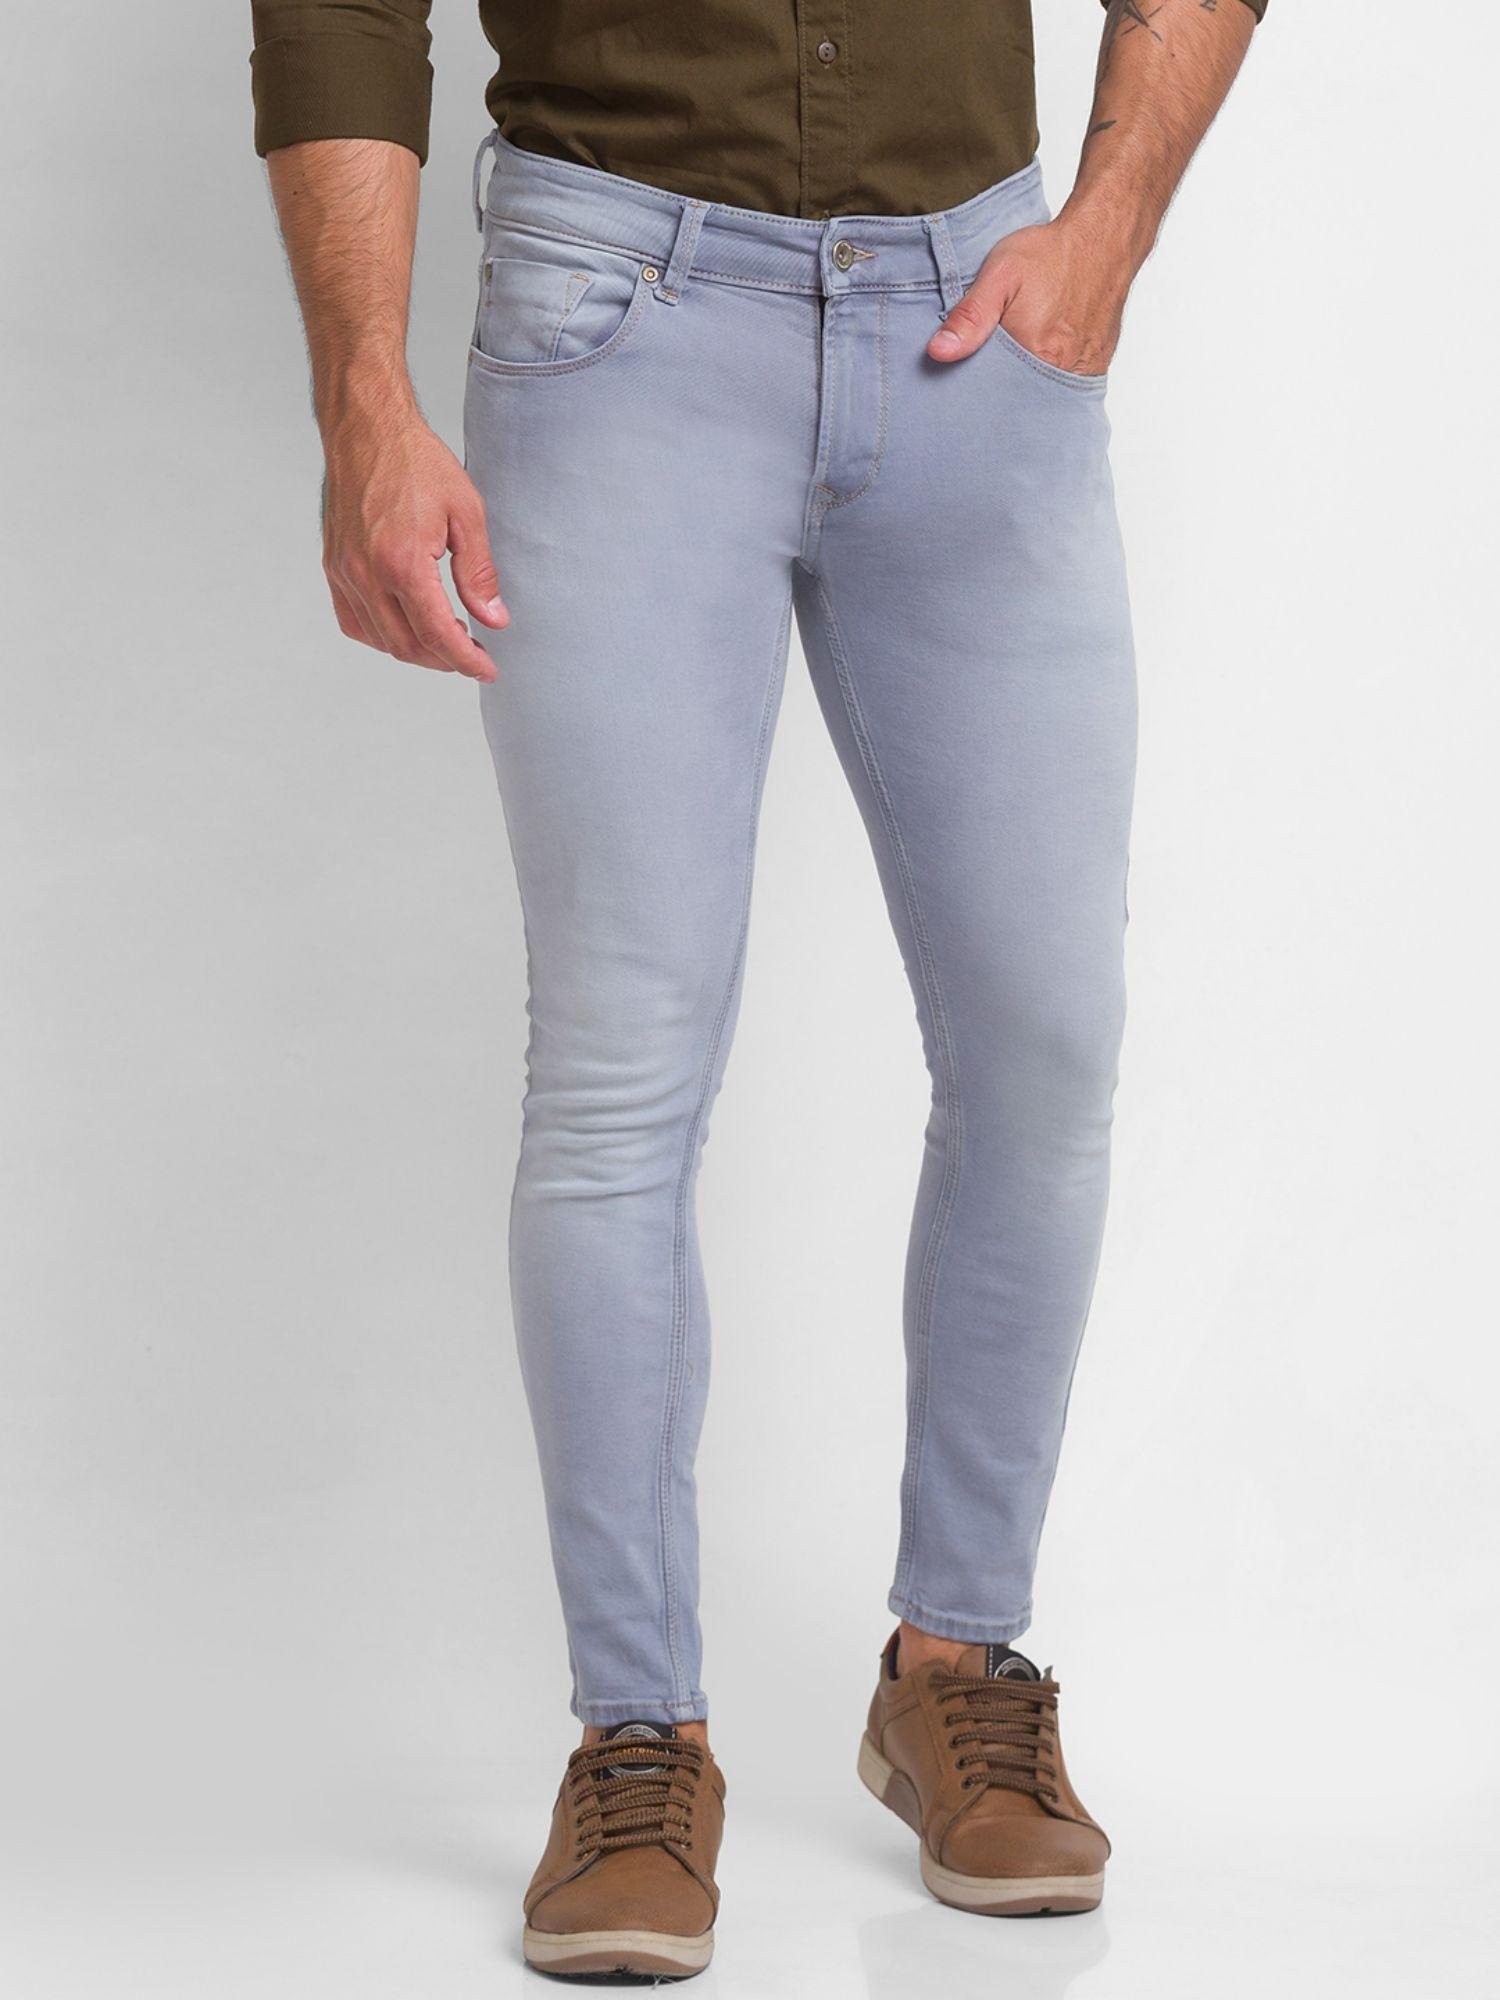 ice grey cotton slim fit tapered length jeans for men (kano)